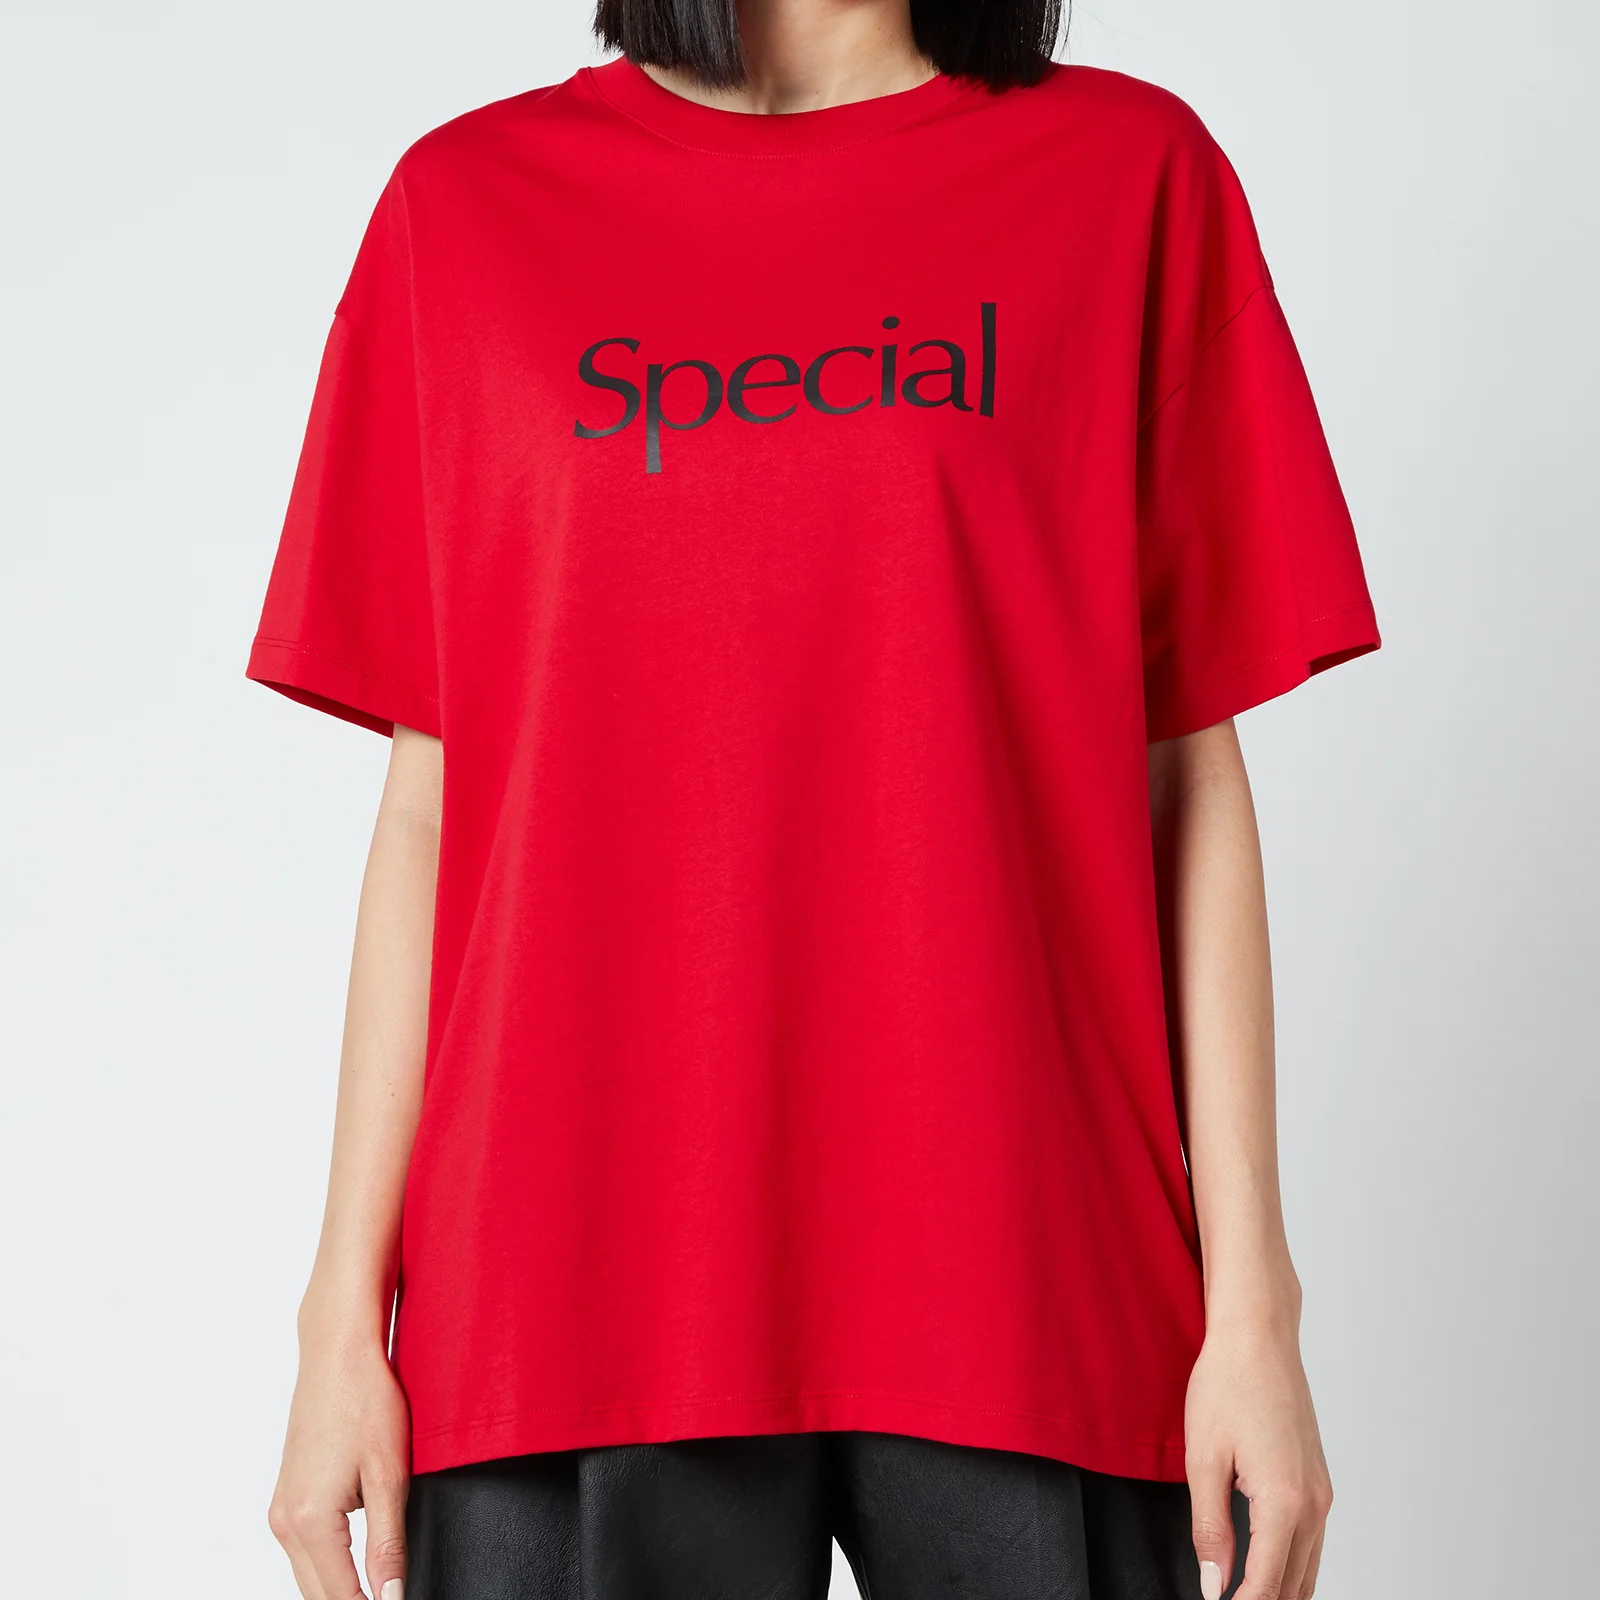 More Joy Women's Special T-Shirt - Red Image 1